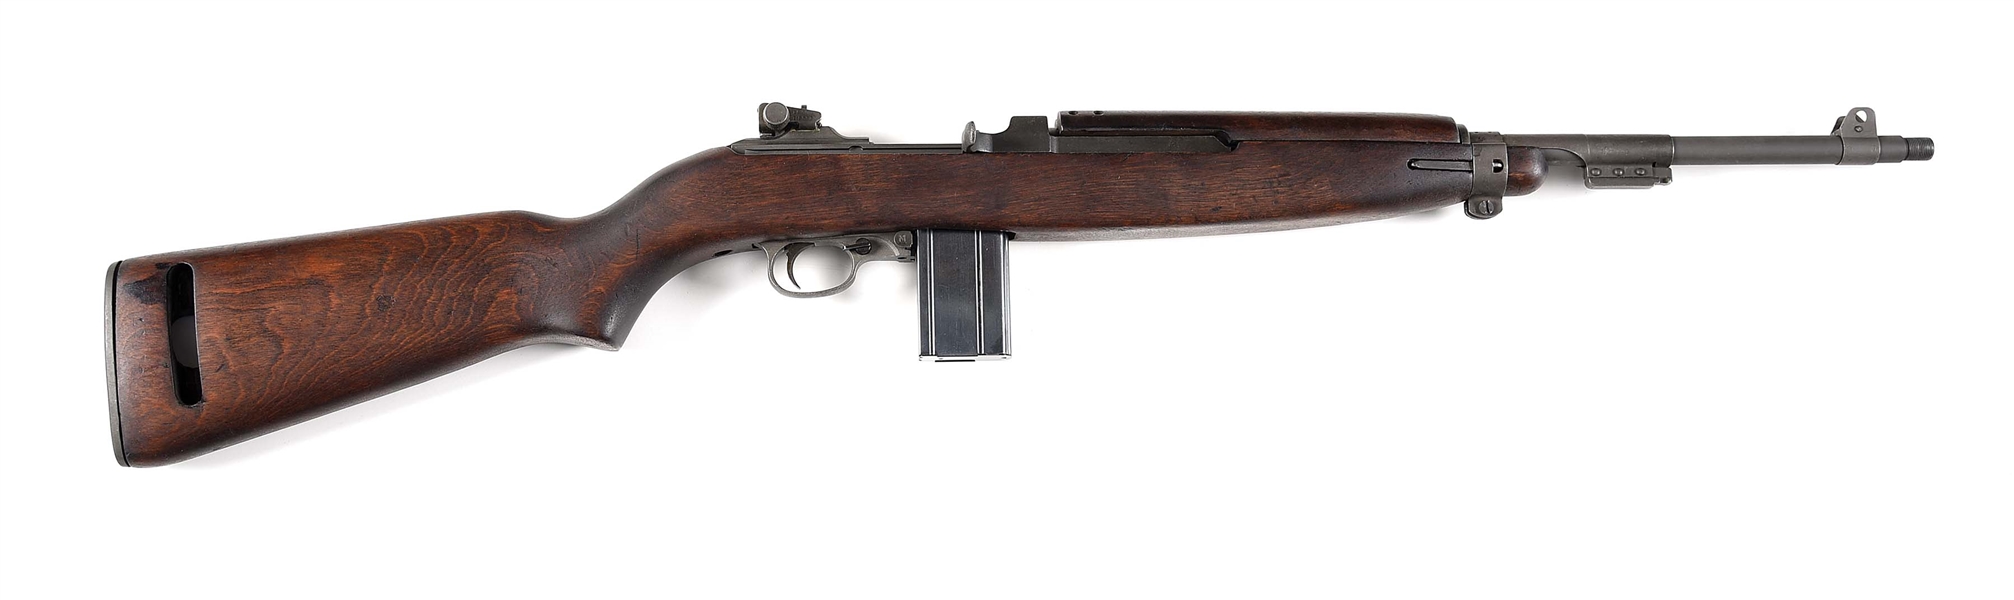 (C) NATIONAL POSTAL METER M1 CARBINE SEMI-AUTOMATIC RIFLE POSSIBLY USED AS A TEST RIFLE.